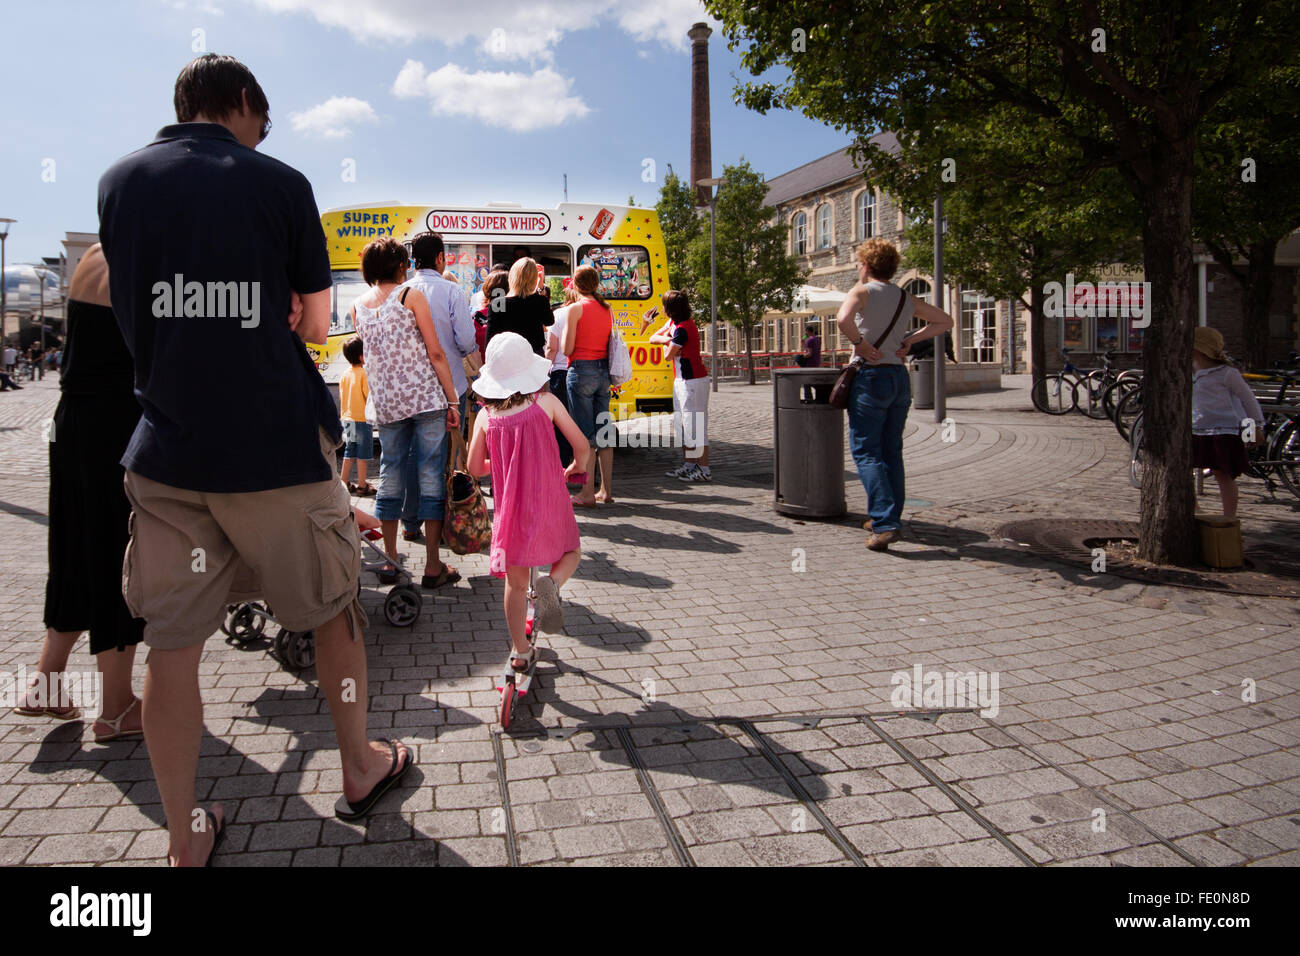 A queue of people waiting to by ice cream from a parked ice cream van on a warm summer day Stock Photo